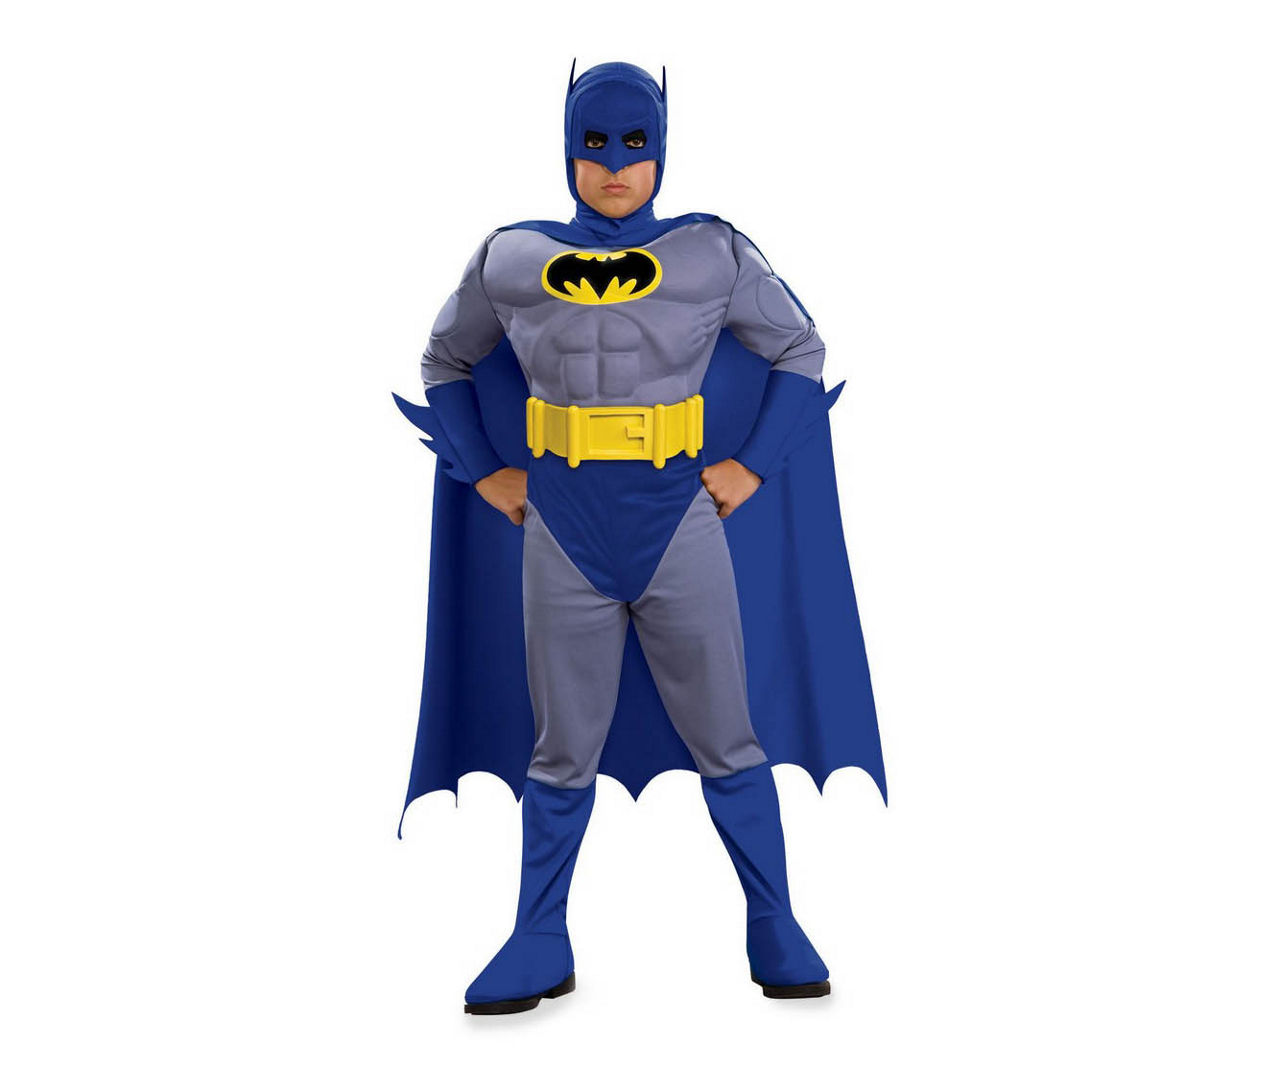 Kids Size L The Brave & The Bold Deluxe Muscle Chest Batman Costume